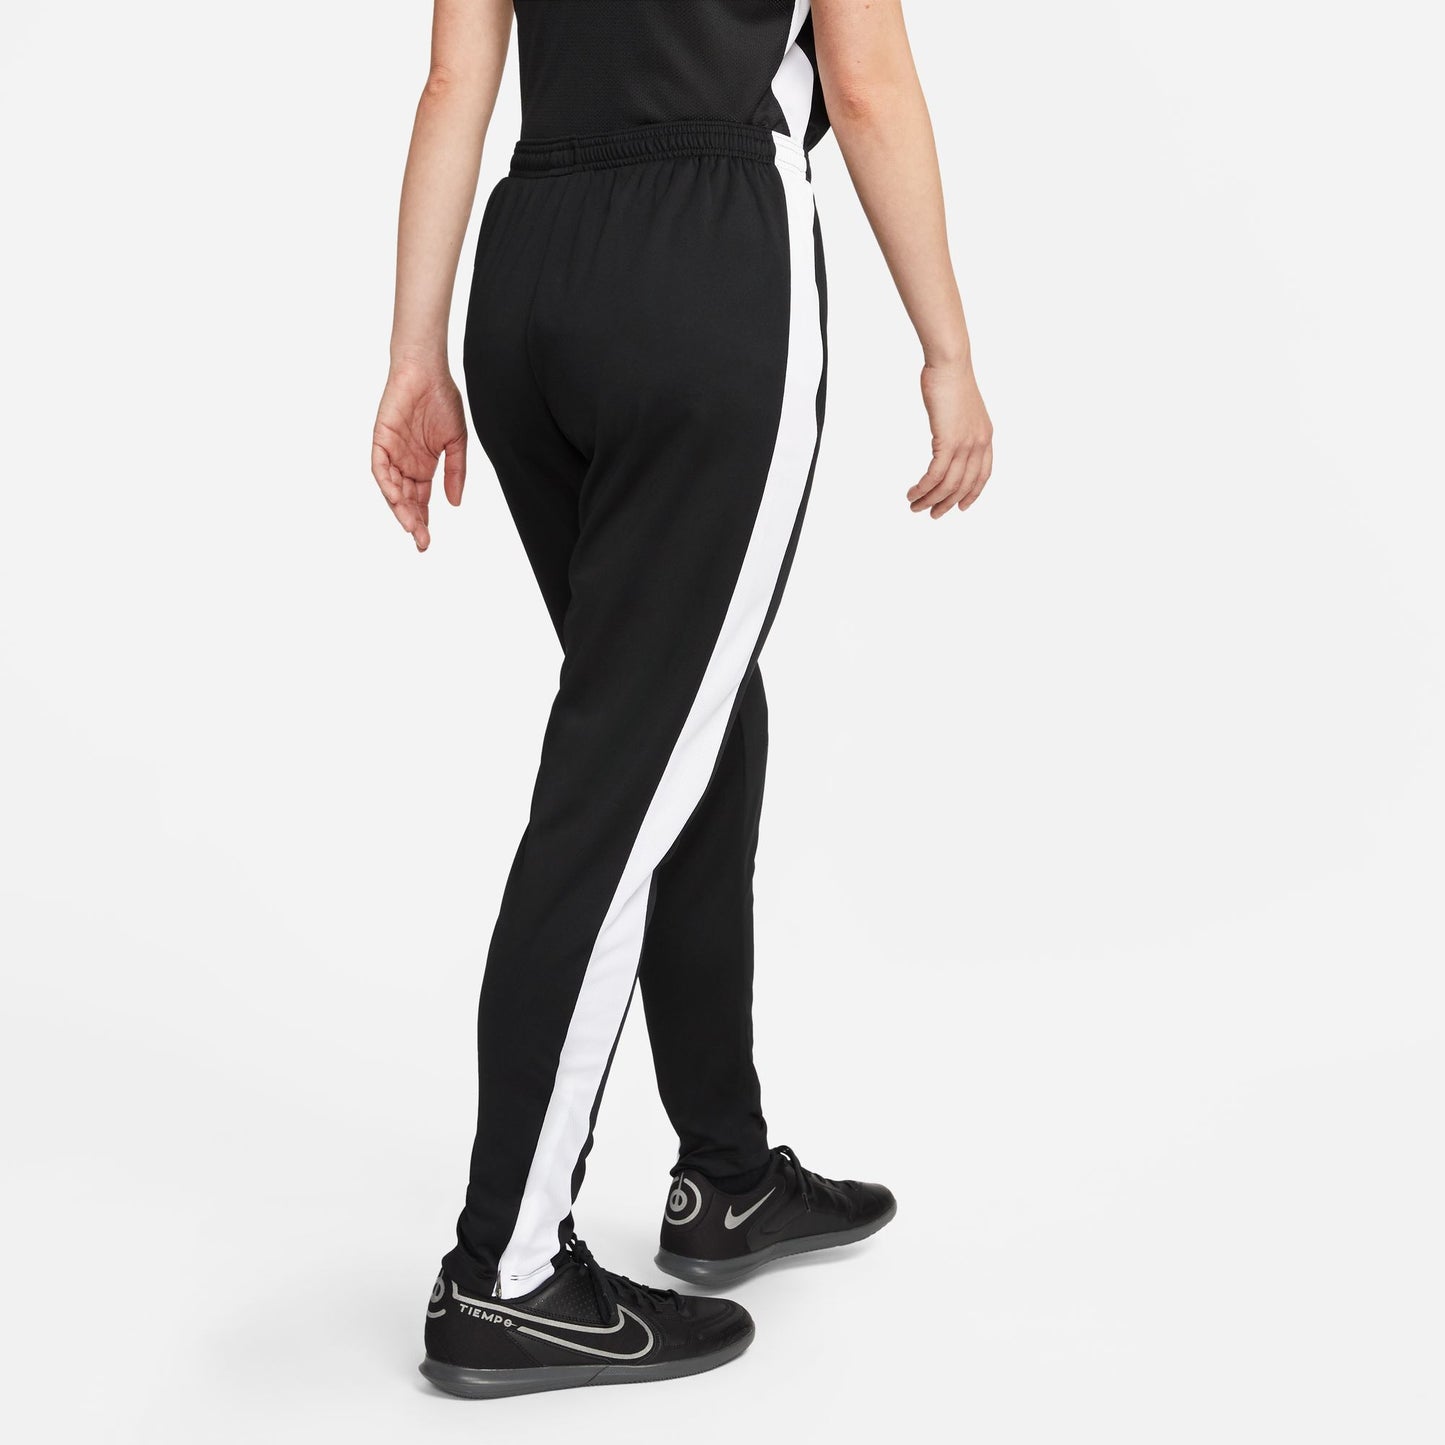 Tribal FC Nike Curved Fit Training Pants